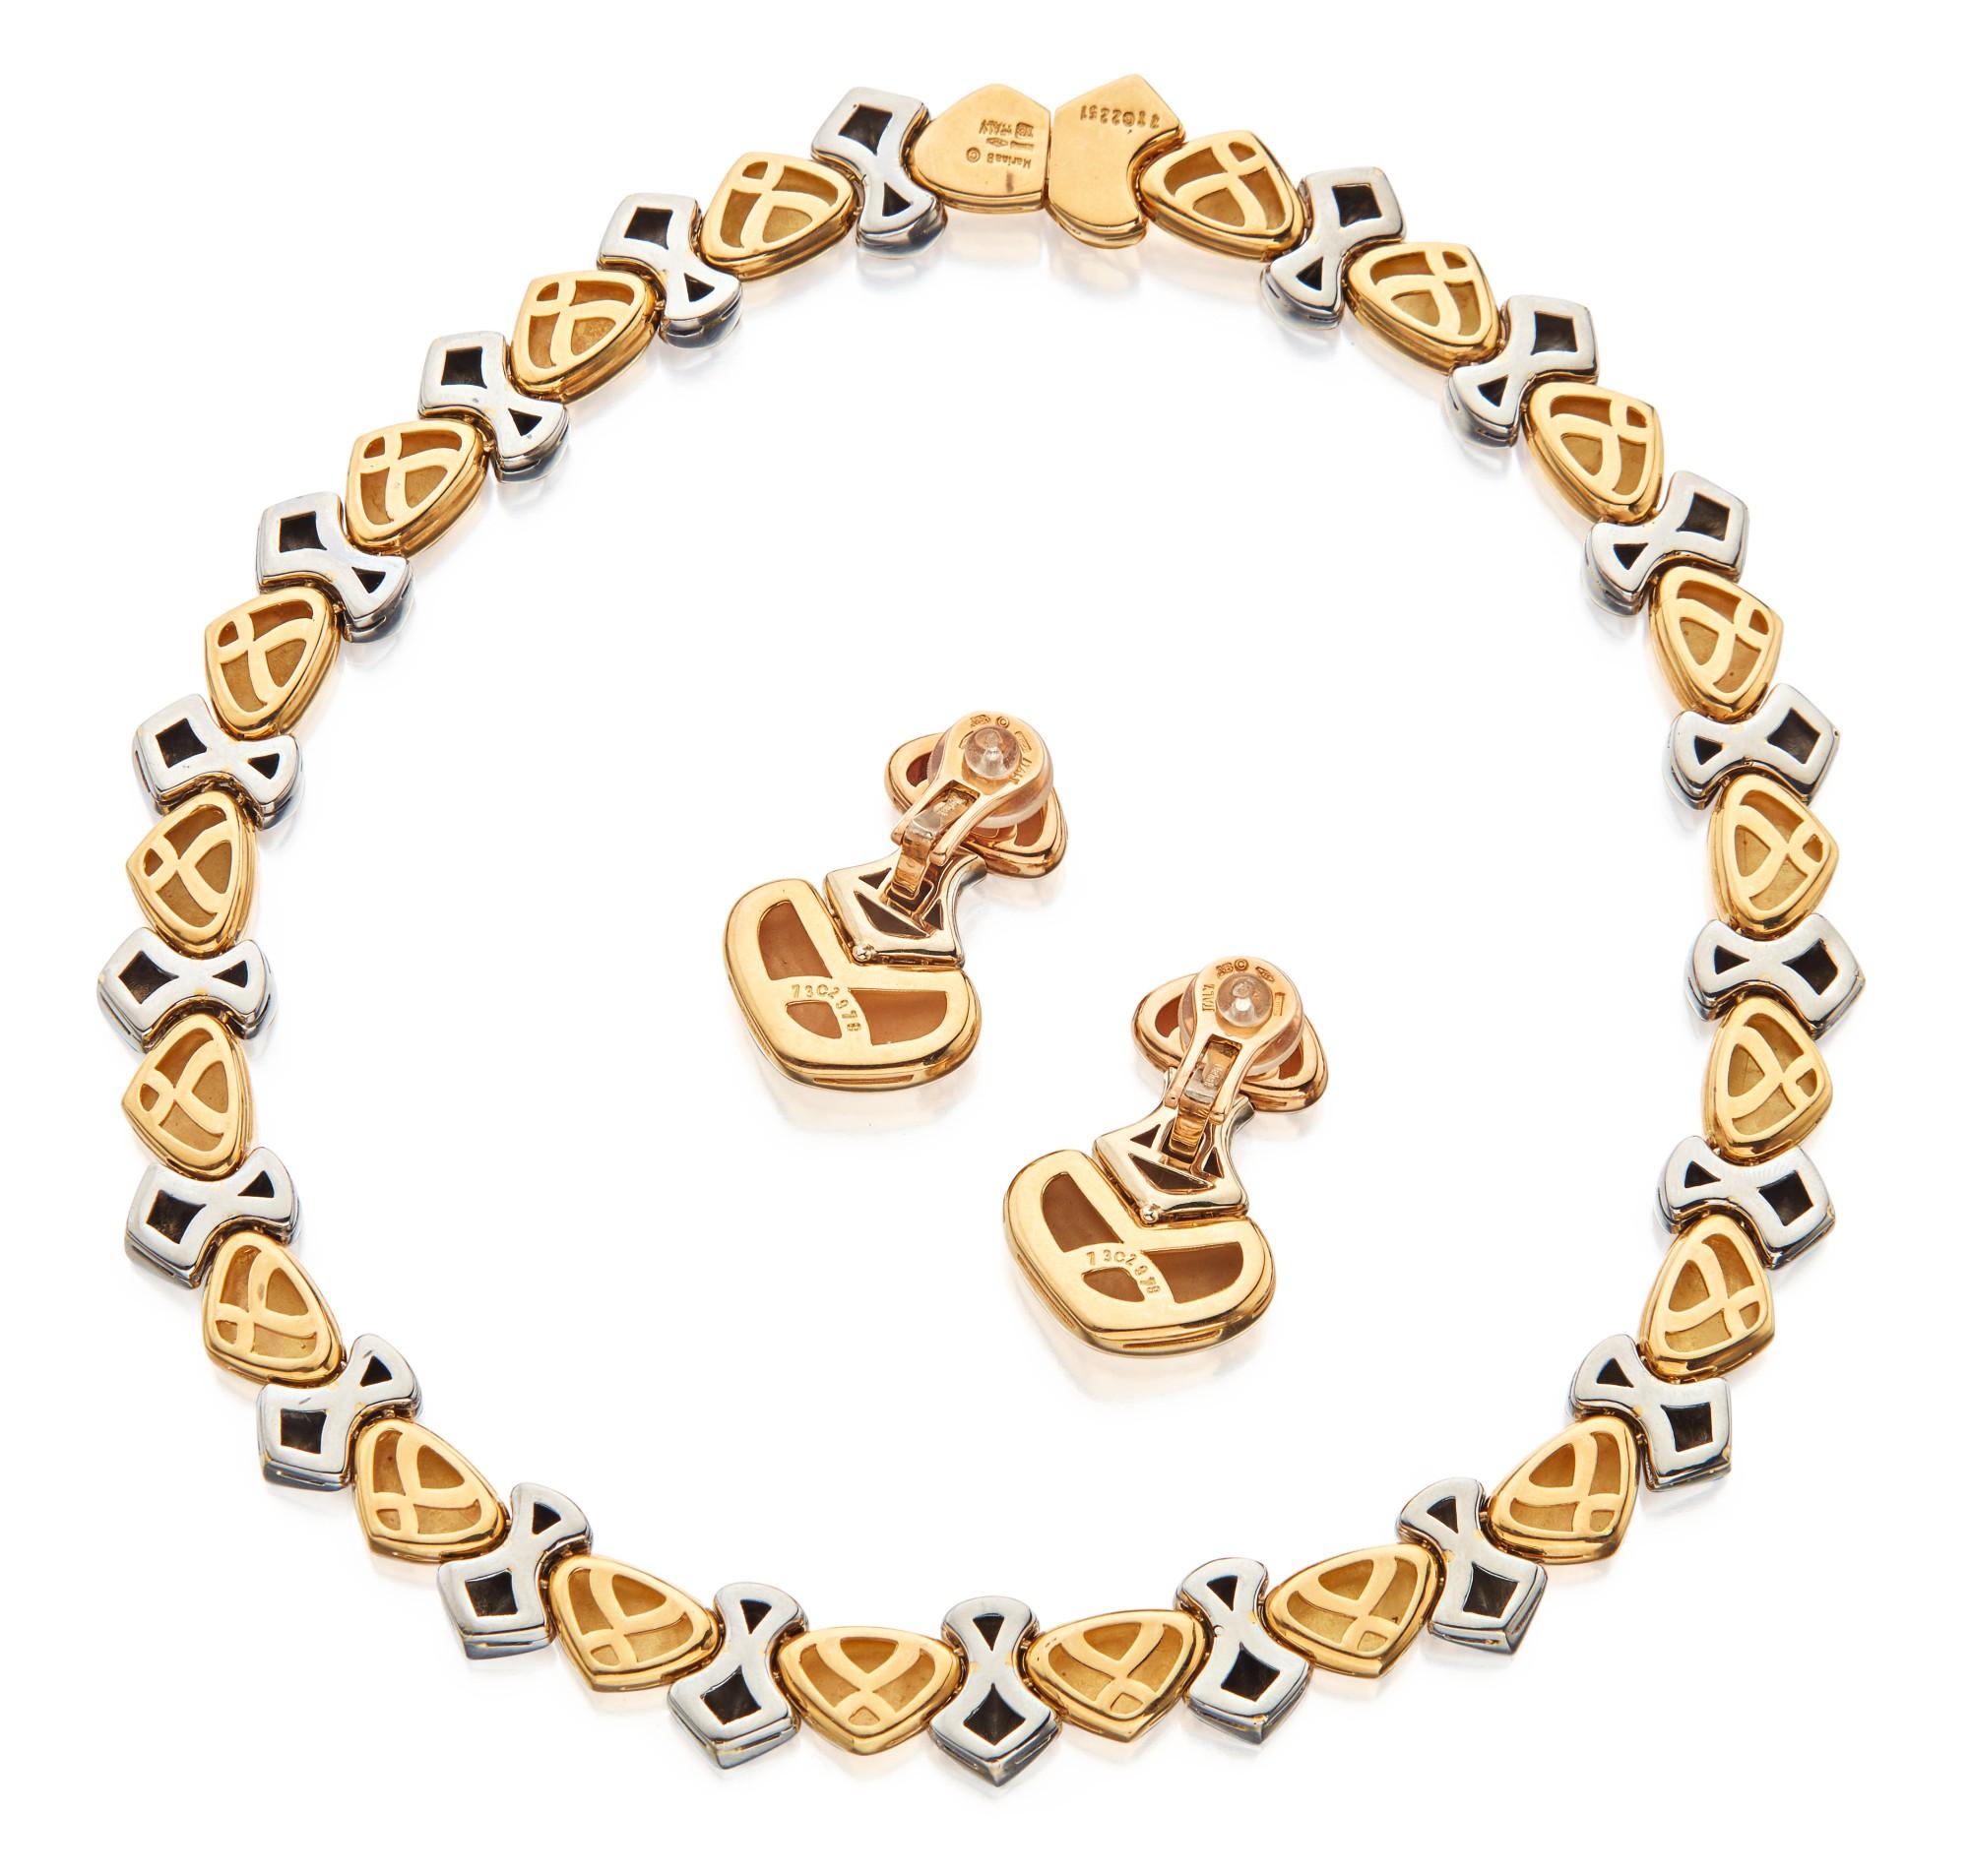 A stylish demi-parure by Marina B featuring stylized heart and shield-shaped links in yellow and white 18 karat gold. Necklace length 14¼ inches; earclip length 1⅜ inches. Made in Italy.